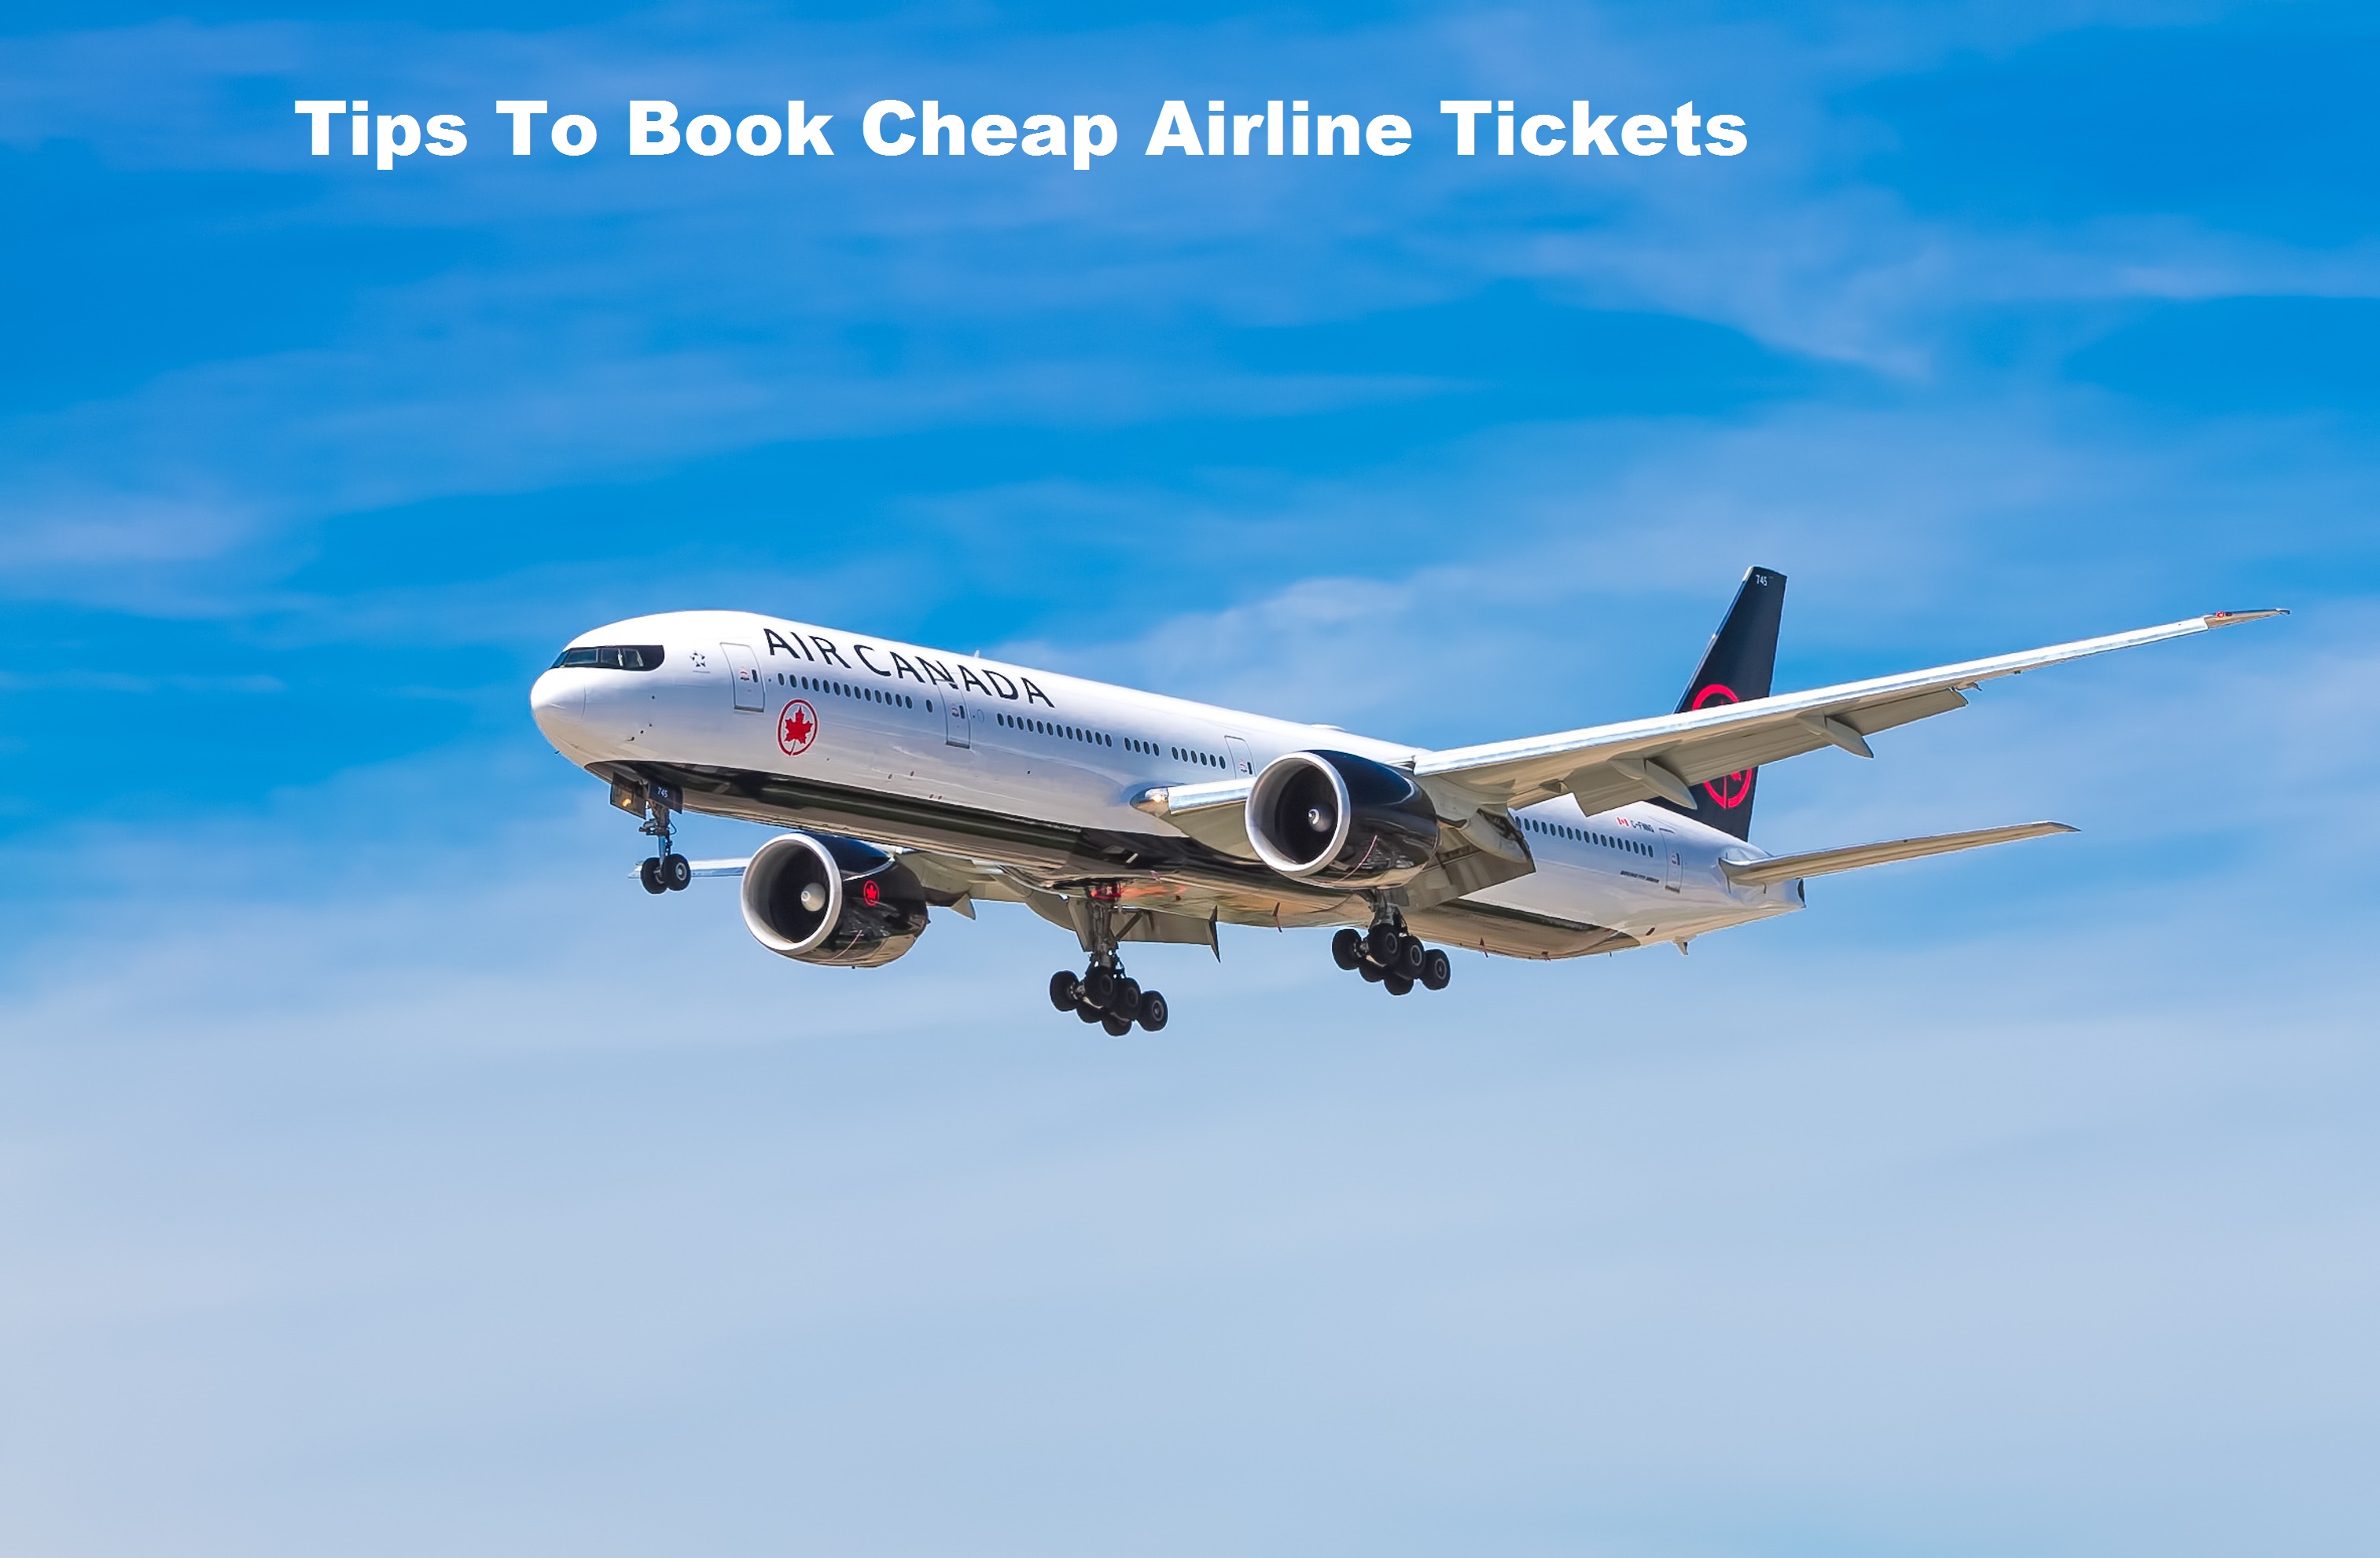 %tips to book cheap airline ticket